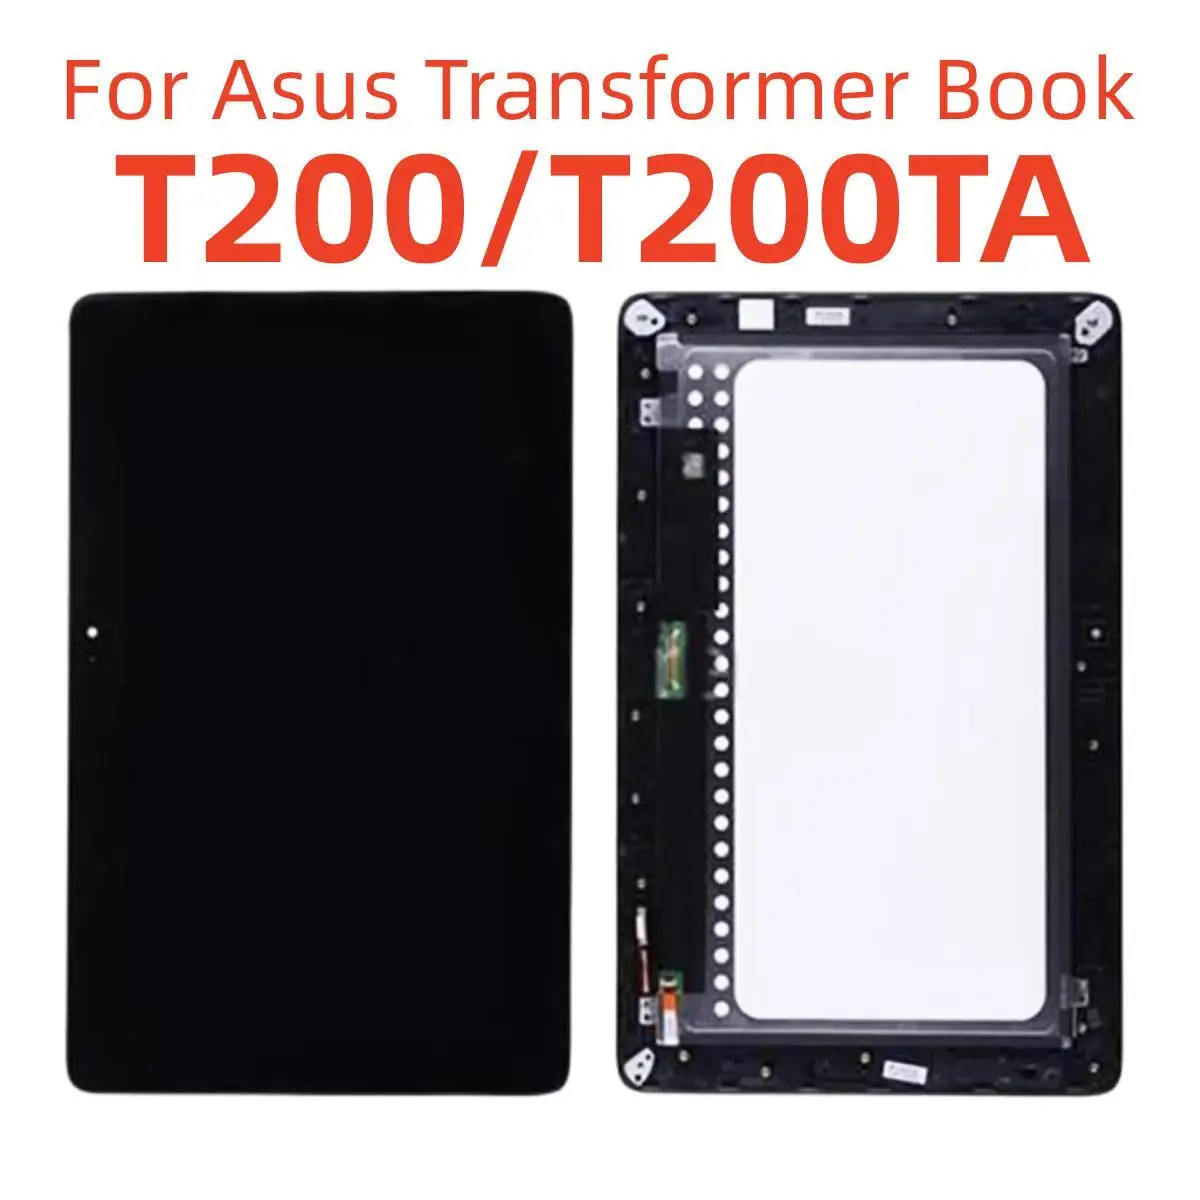 For Asus Transformer Book T200 T200TA LCD With Frame,Tablet LCD Touch Screen Digitizer Panel Assembly For Asus T200 T200TA